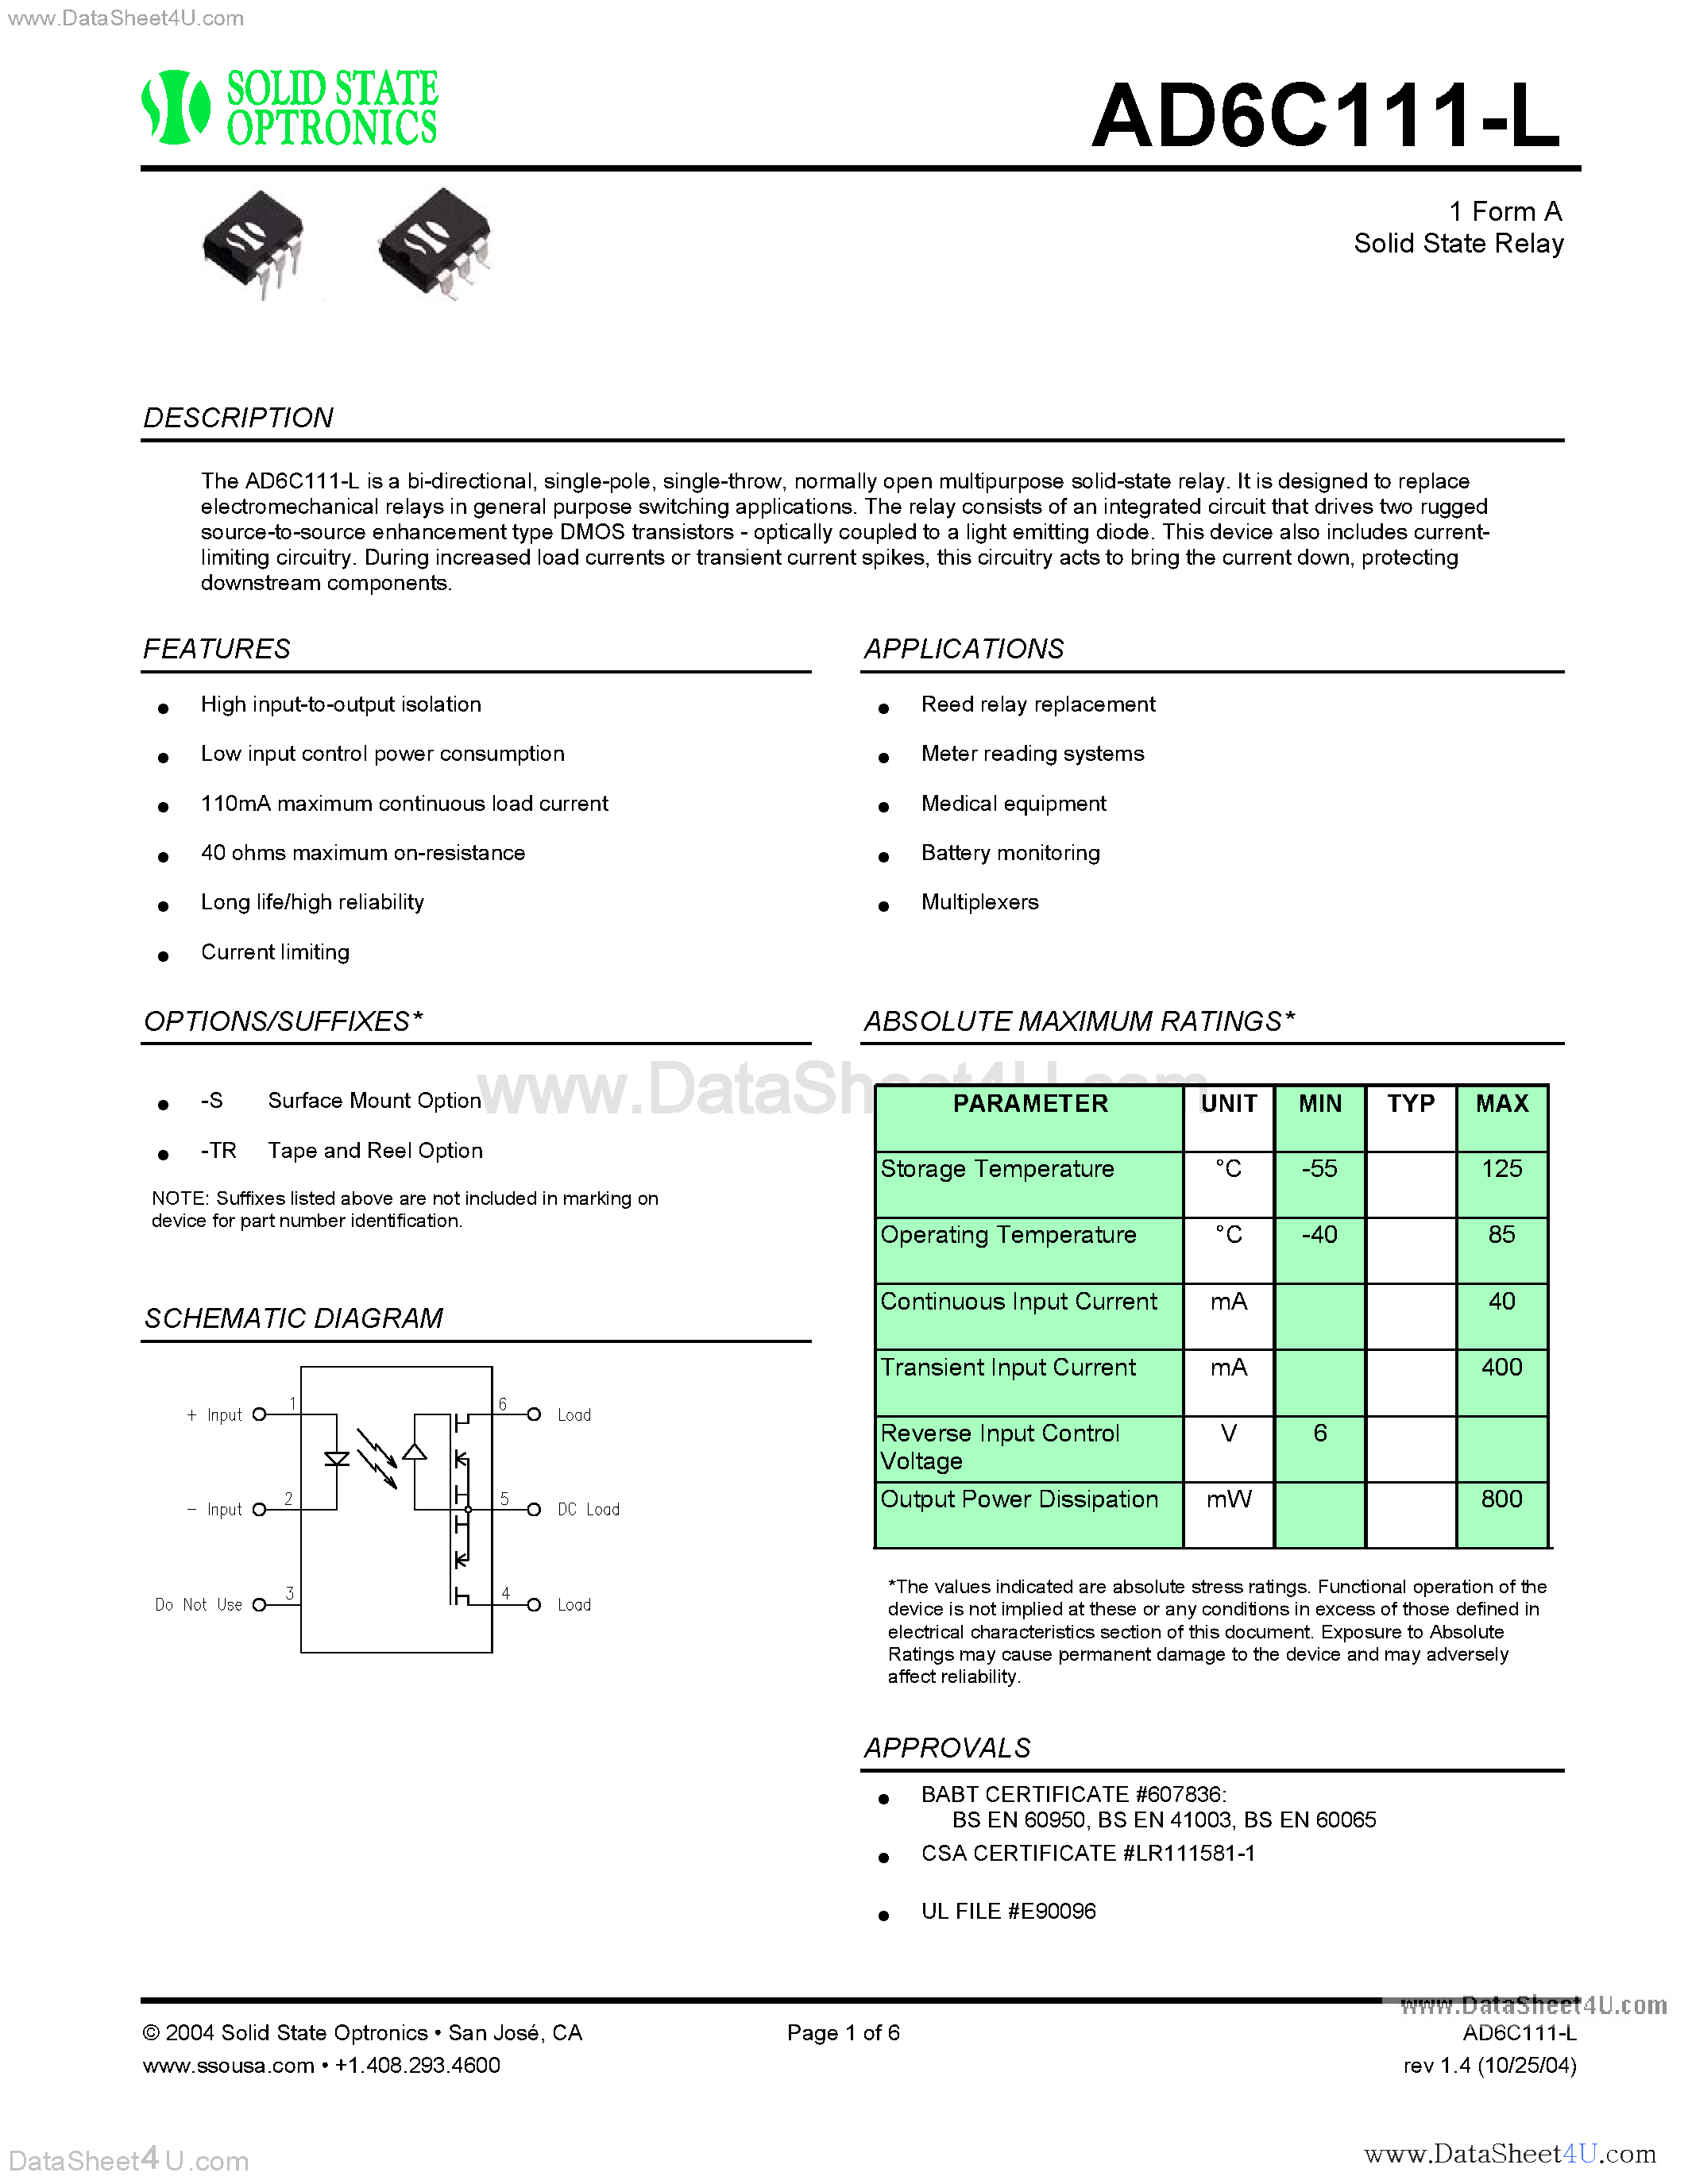 Datasheet AD6-C111-L - Relay page 1